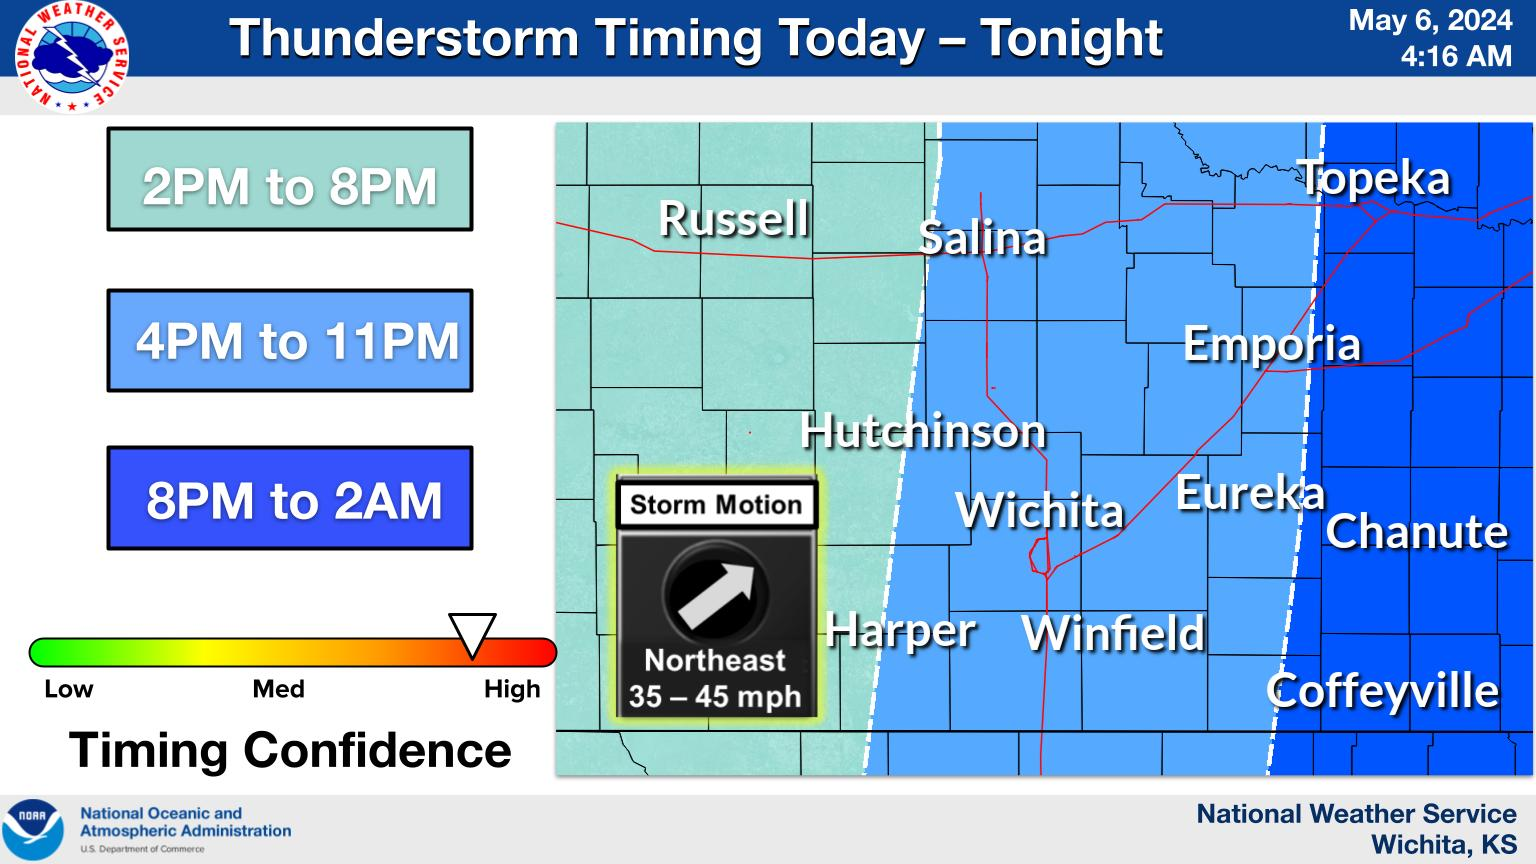 Evening Storms Expected with Potential Hail and Damaging Winds